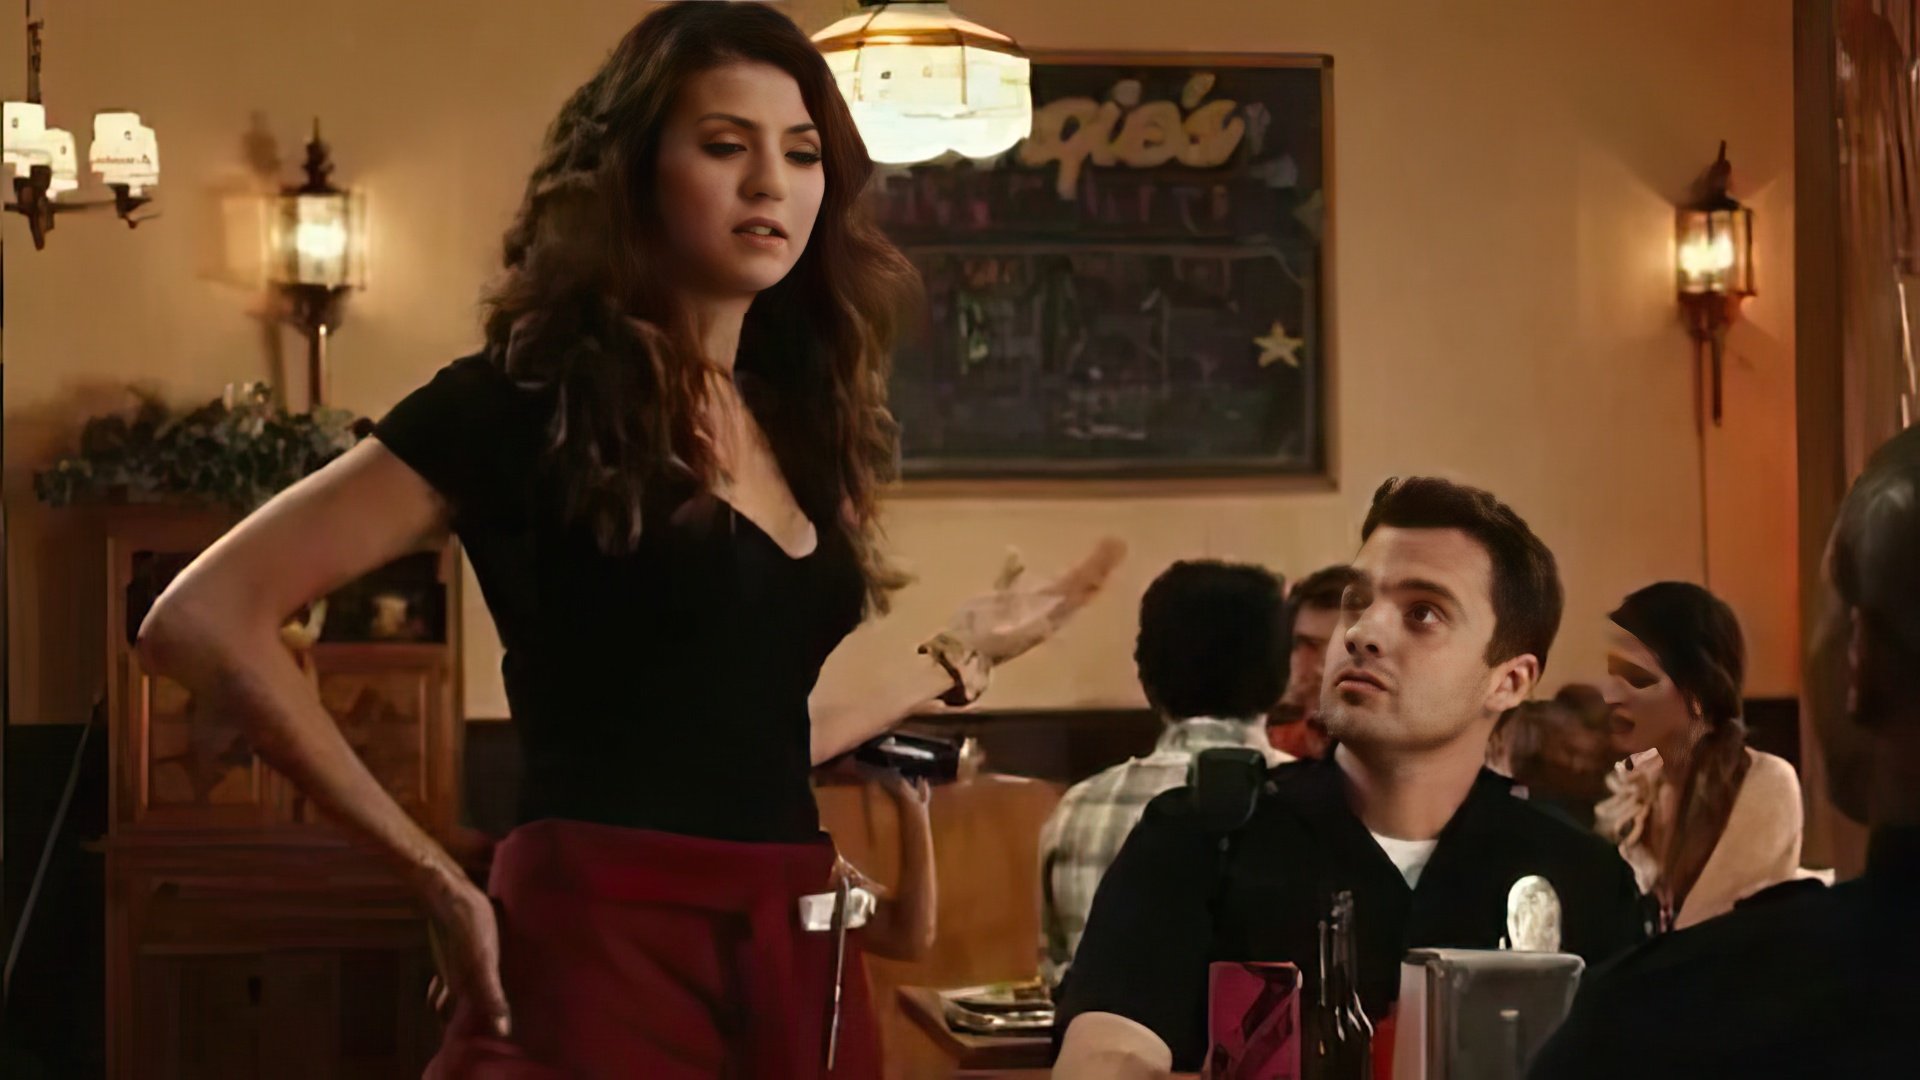 In the comedy “Let’s Be Cops” Nina plays a waitress